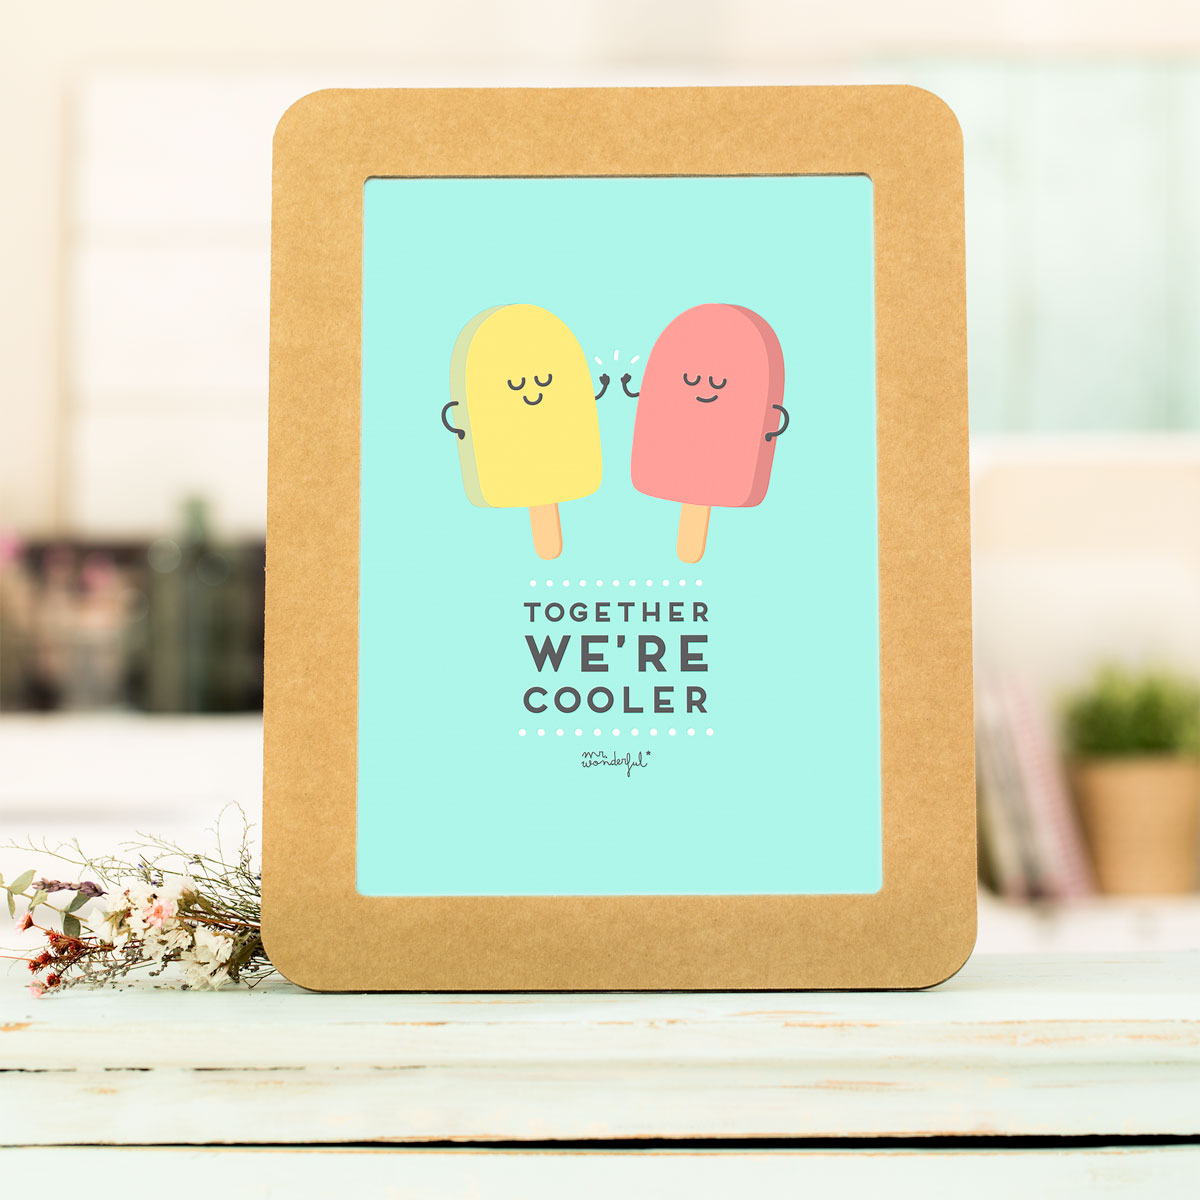 mrwonderful_LAM-RELIEVE-20-MARCO_together-cooler